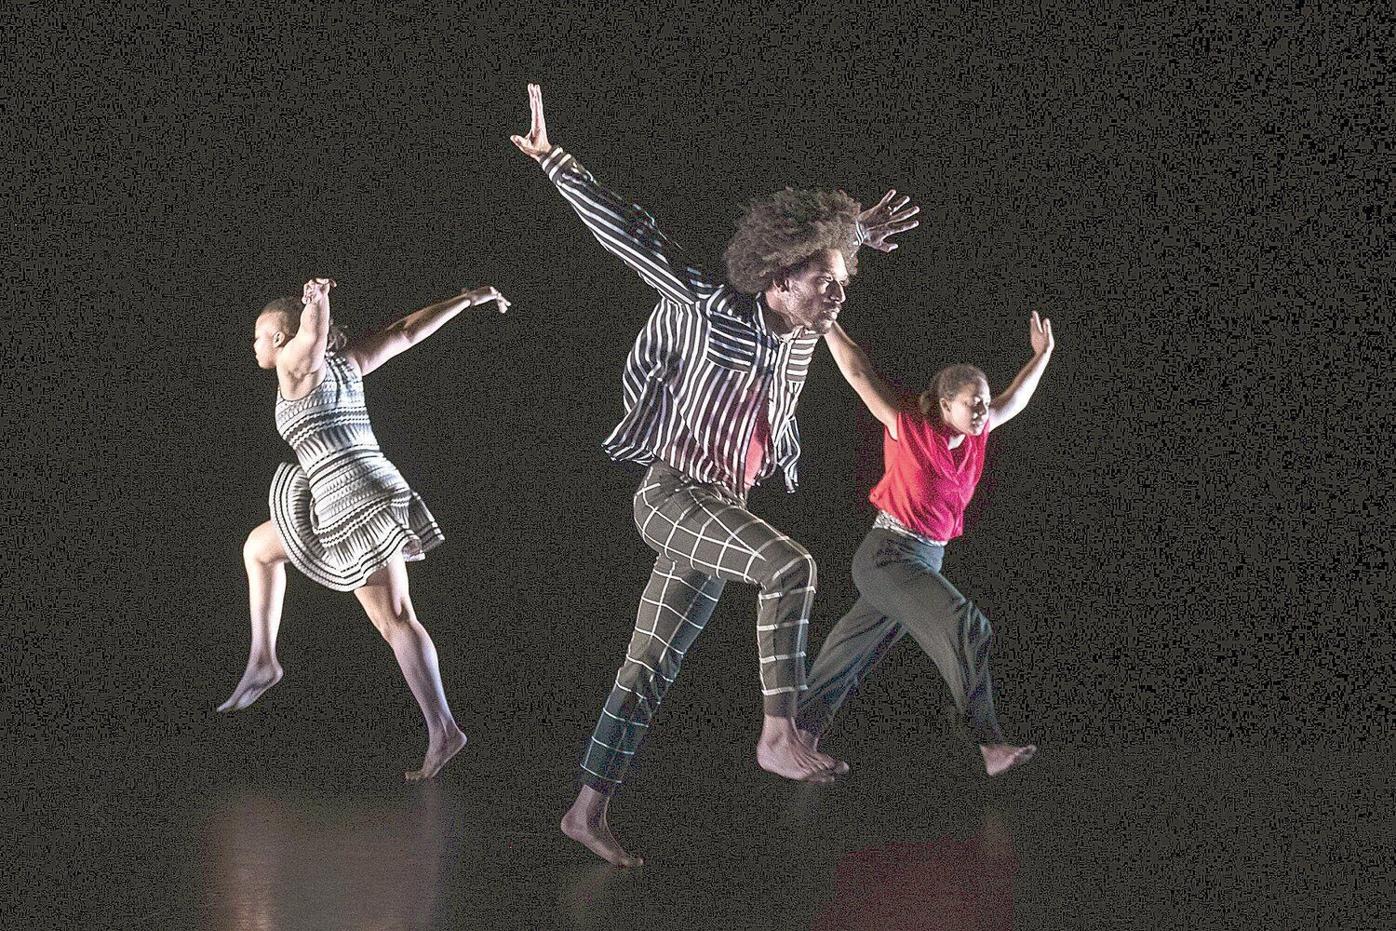 'Gorgeously diverse' display of dance in 2019